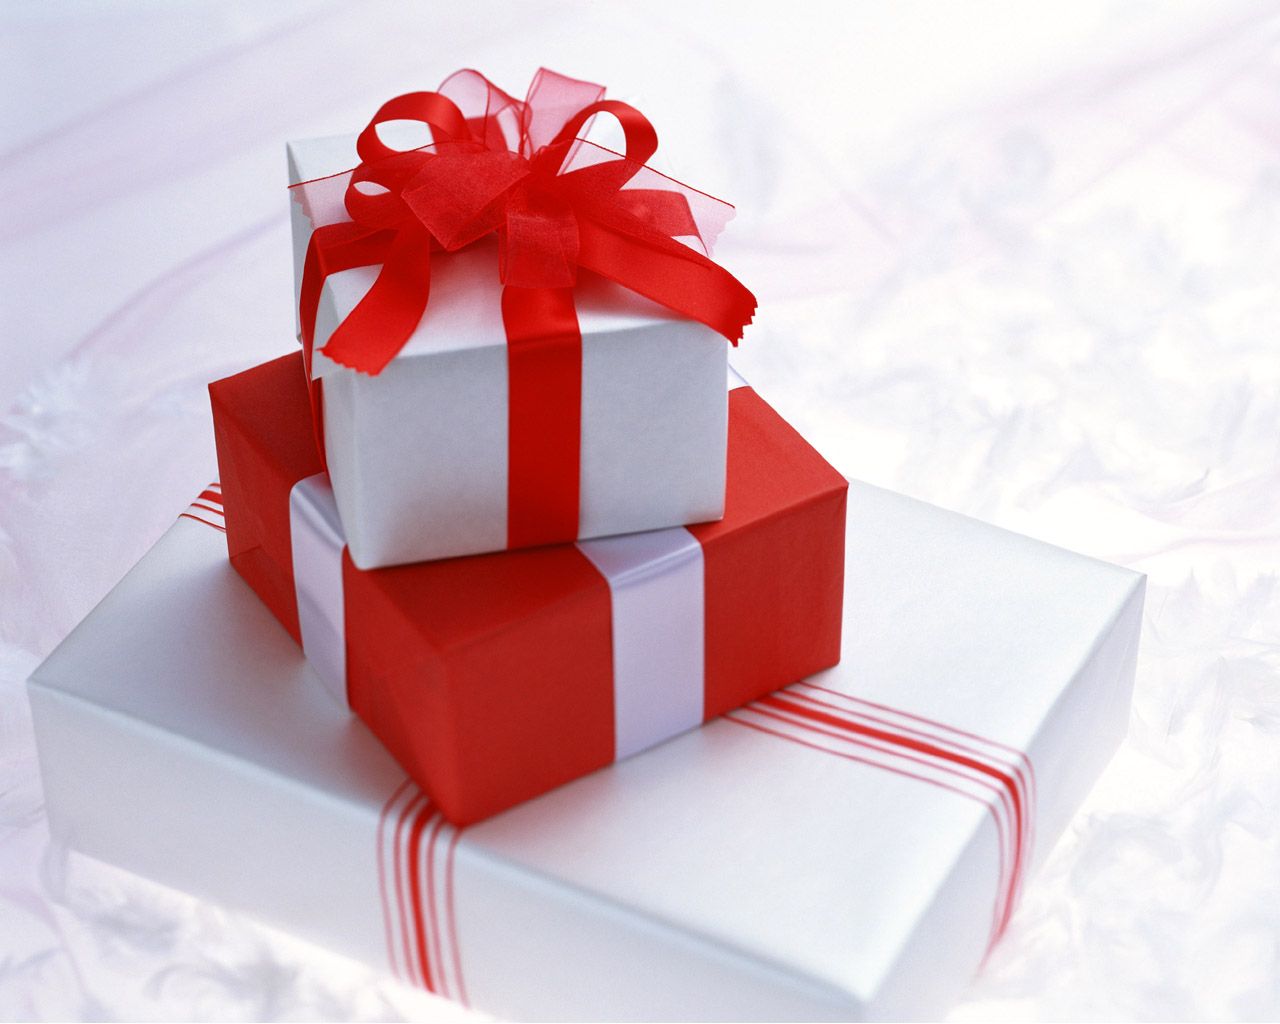 Simple Gift Wallpapers Others Hd Wallpapers Pinterest - Gift Images Hd Download , HD Wallpaper & Backgrounds